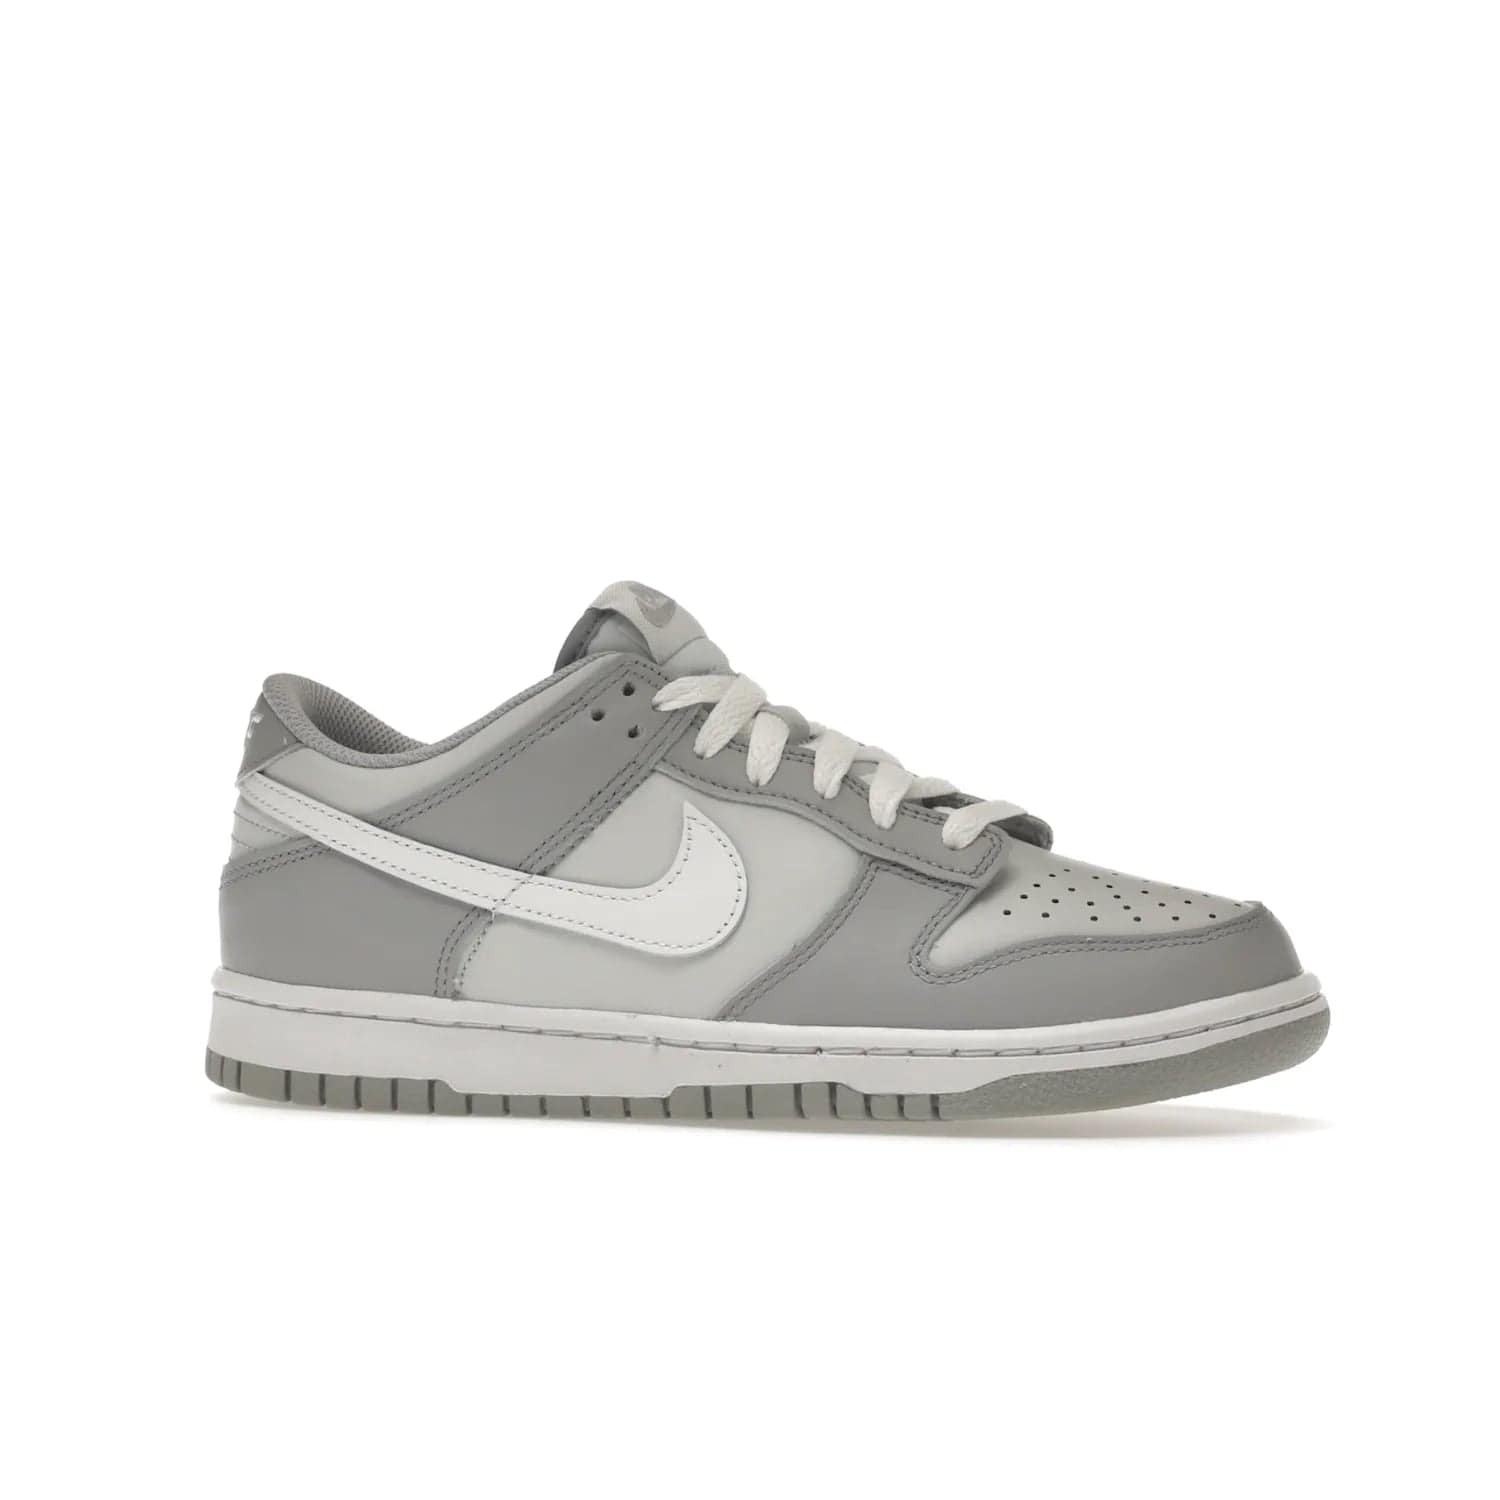 Nike Dunk Low Two-Toned Grey (GS) - Image 3 - Only at www.BallersClubKickz.com - Stylish Nike Dunk Low GS Two-Toned Grey featuring leather build, light/dark grey shades, white Swoosh logo & gray rubber outsole. Get ready to make a statement with this timeless classic released in March 2022.